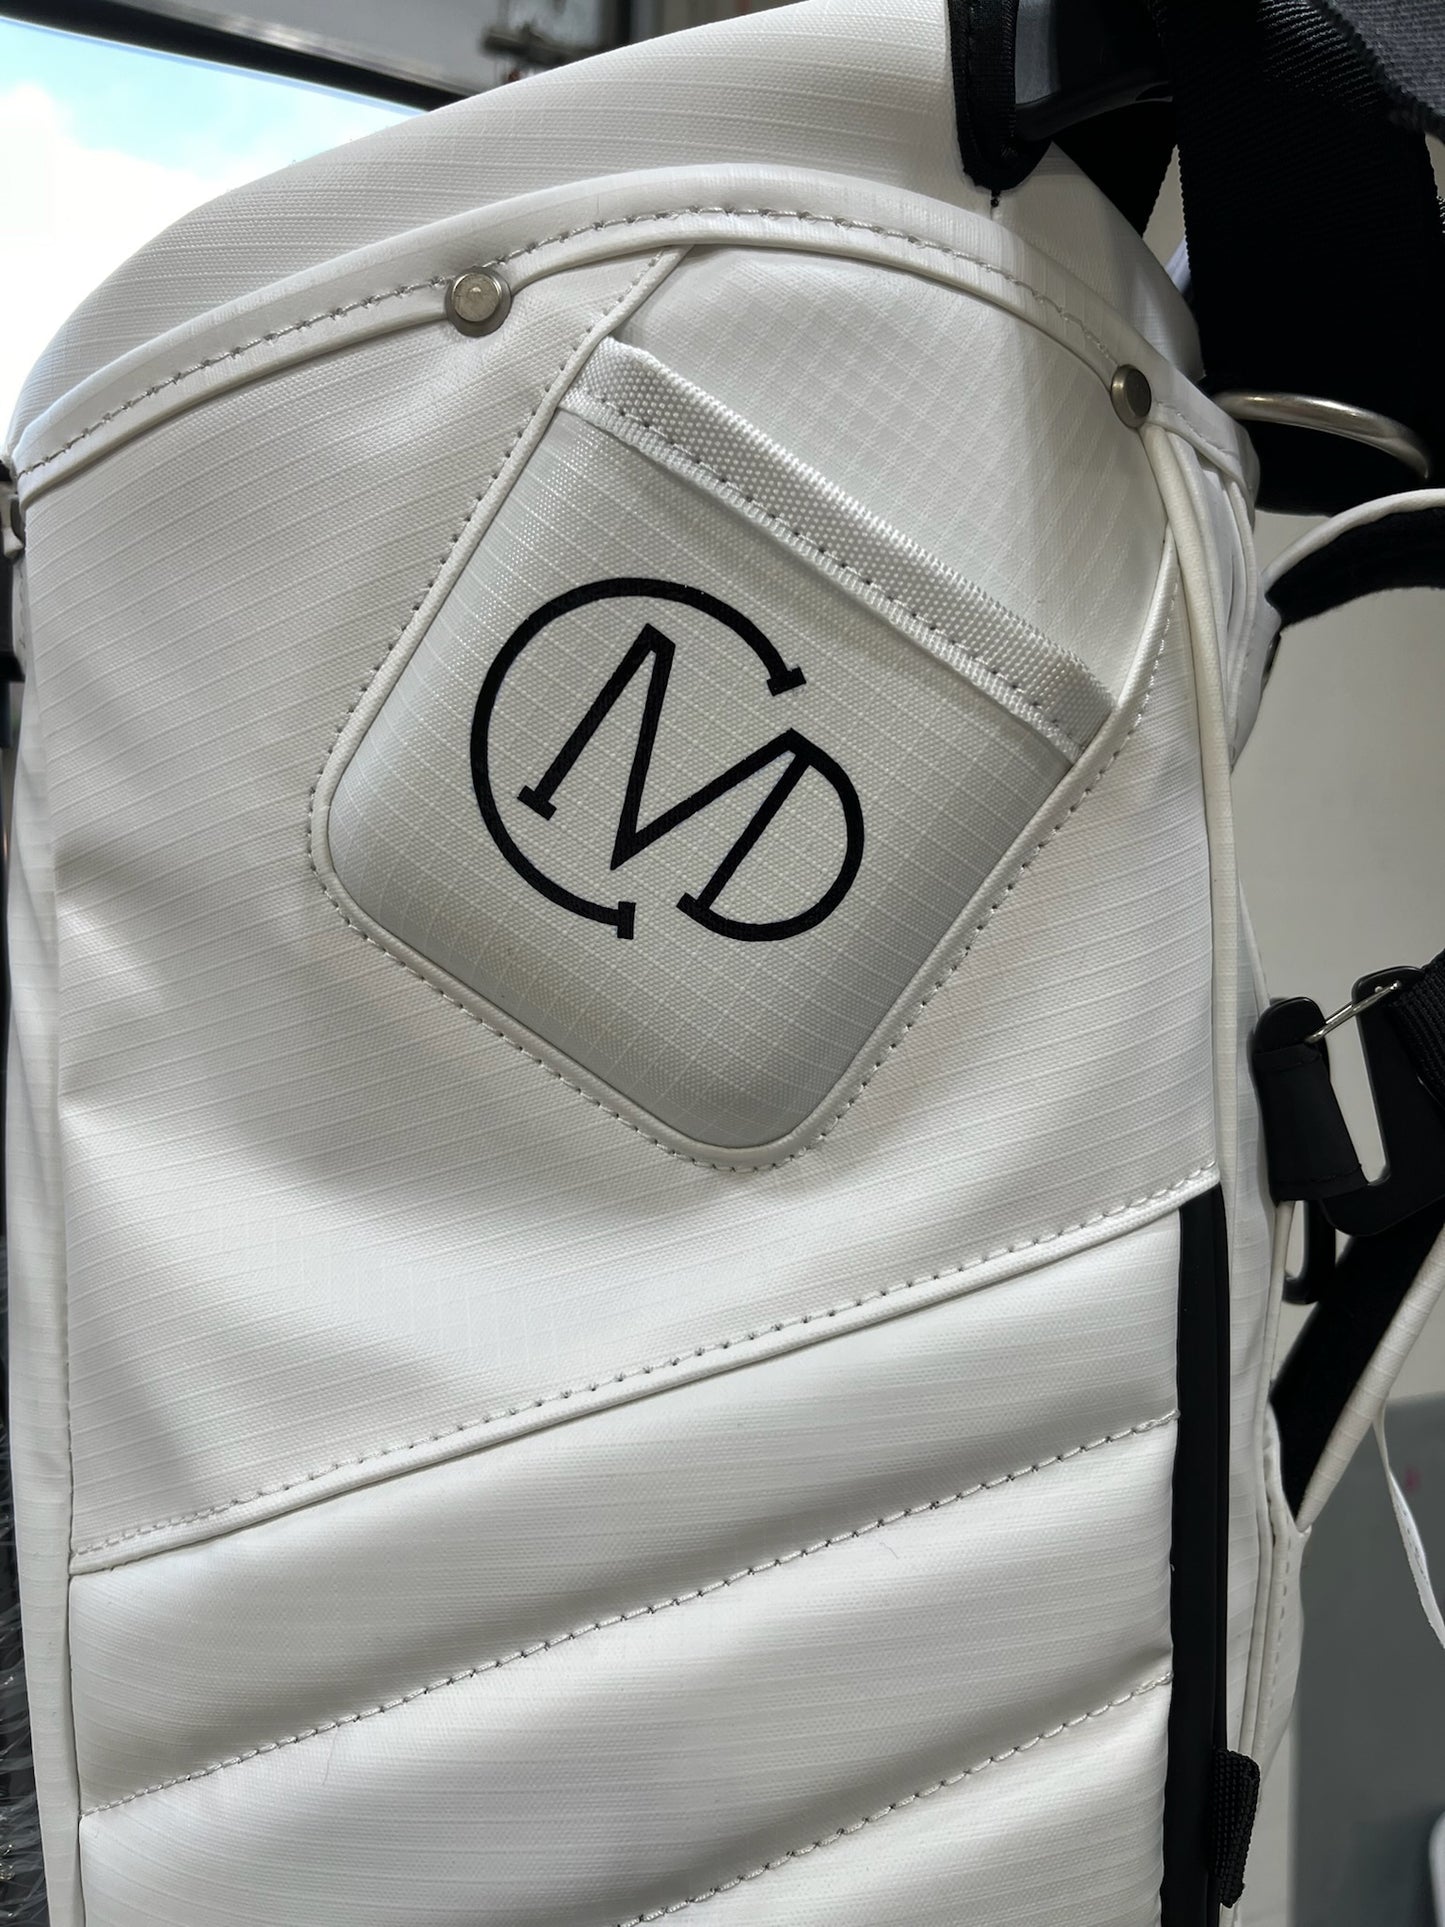 CMD Golf's logo hand painted on the phone filming pocket of our white MR1 eco golf bag.